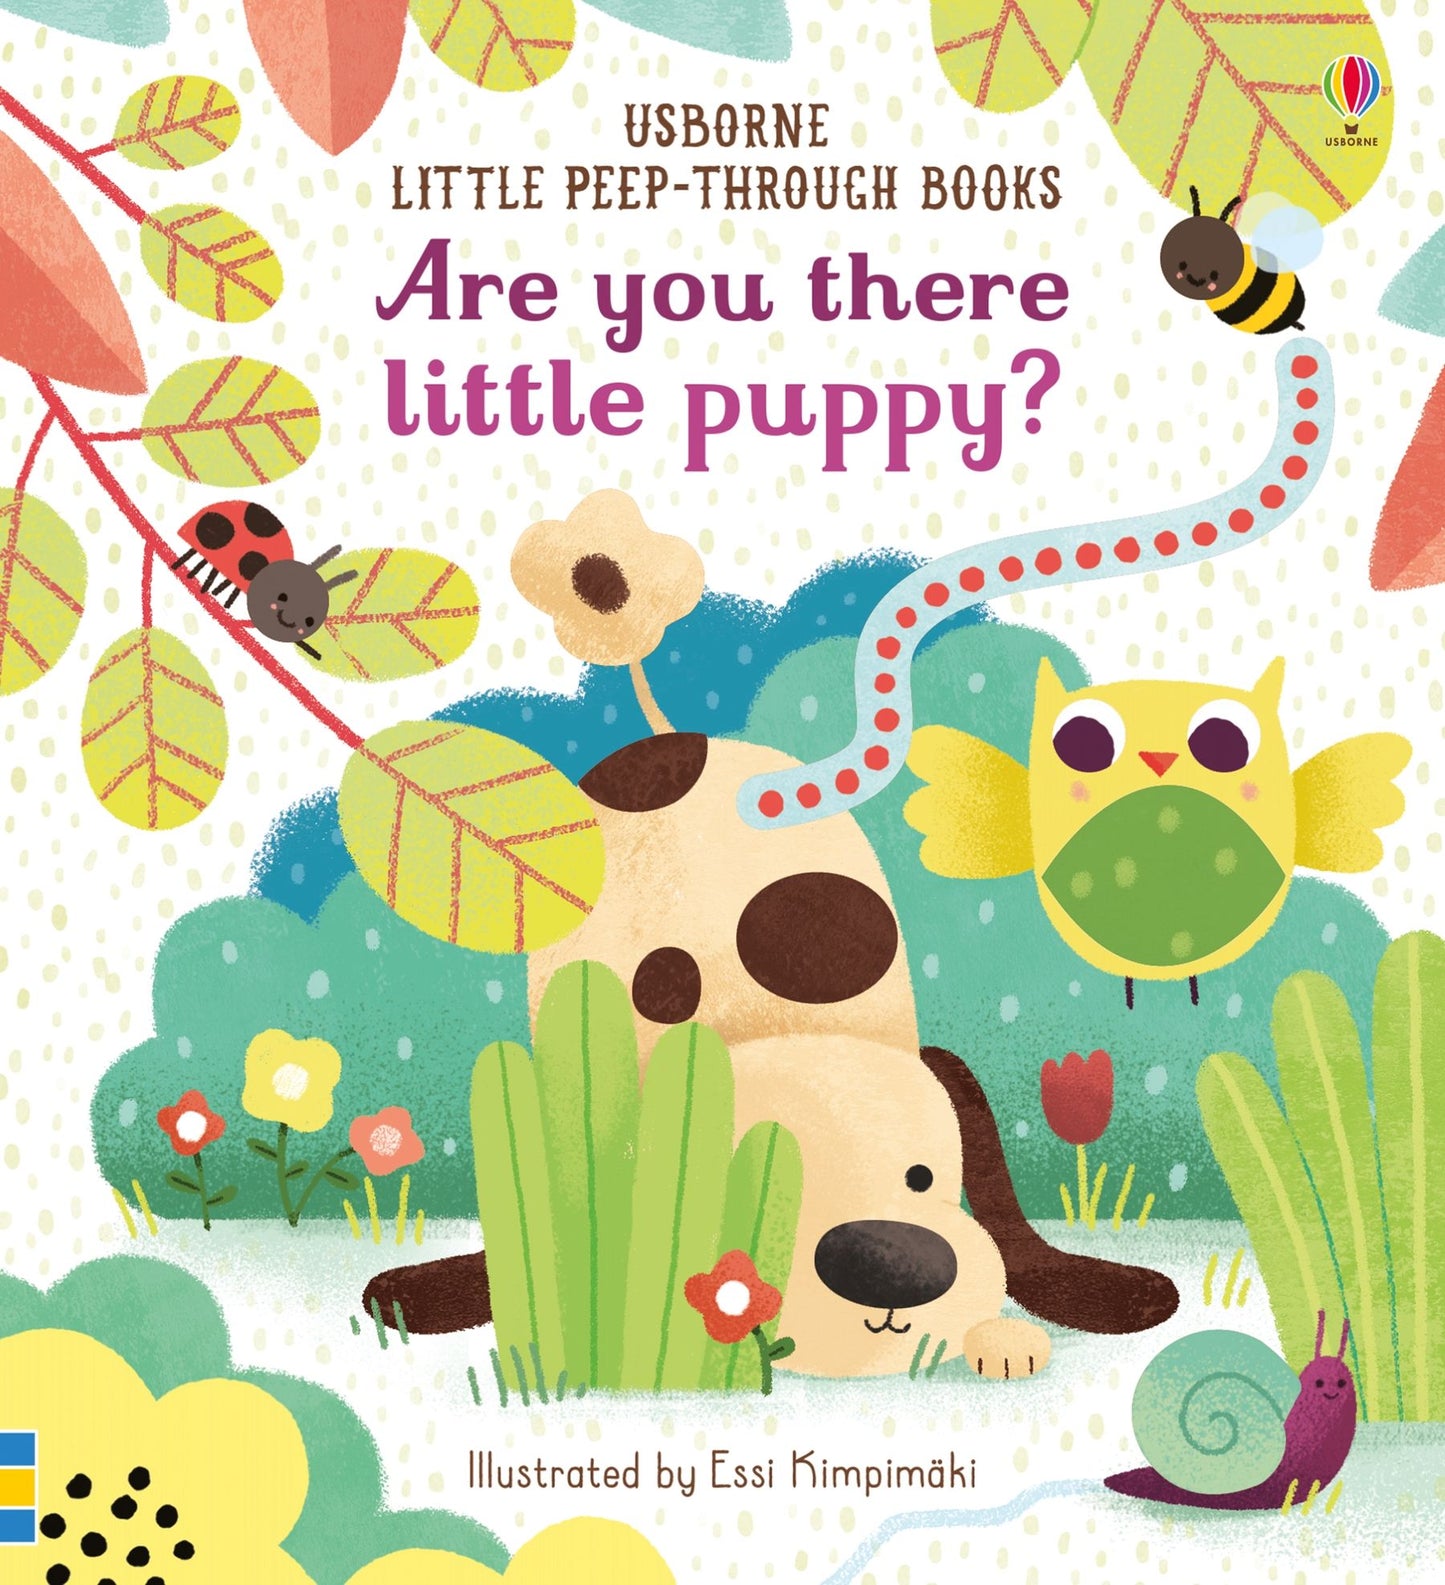 Usborne Books - Are You There Little Puppy